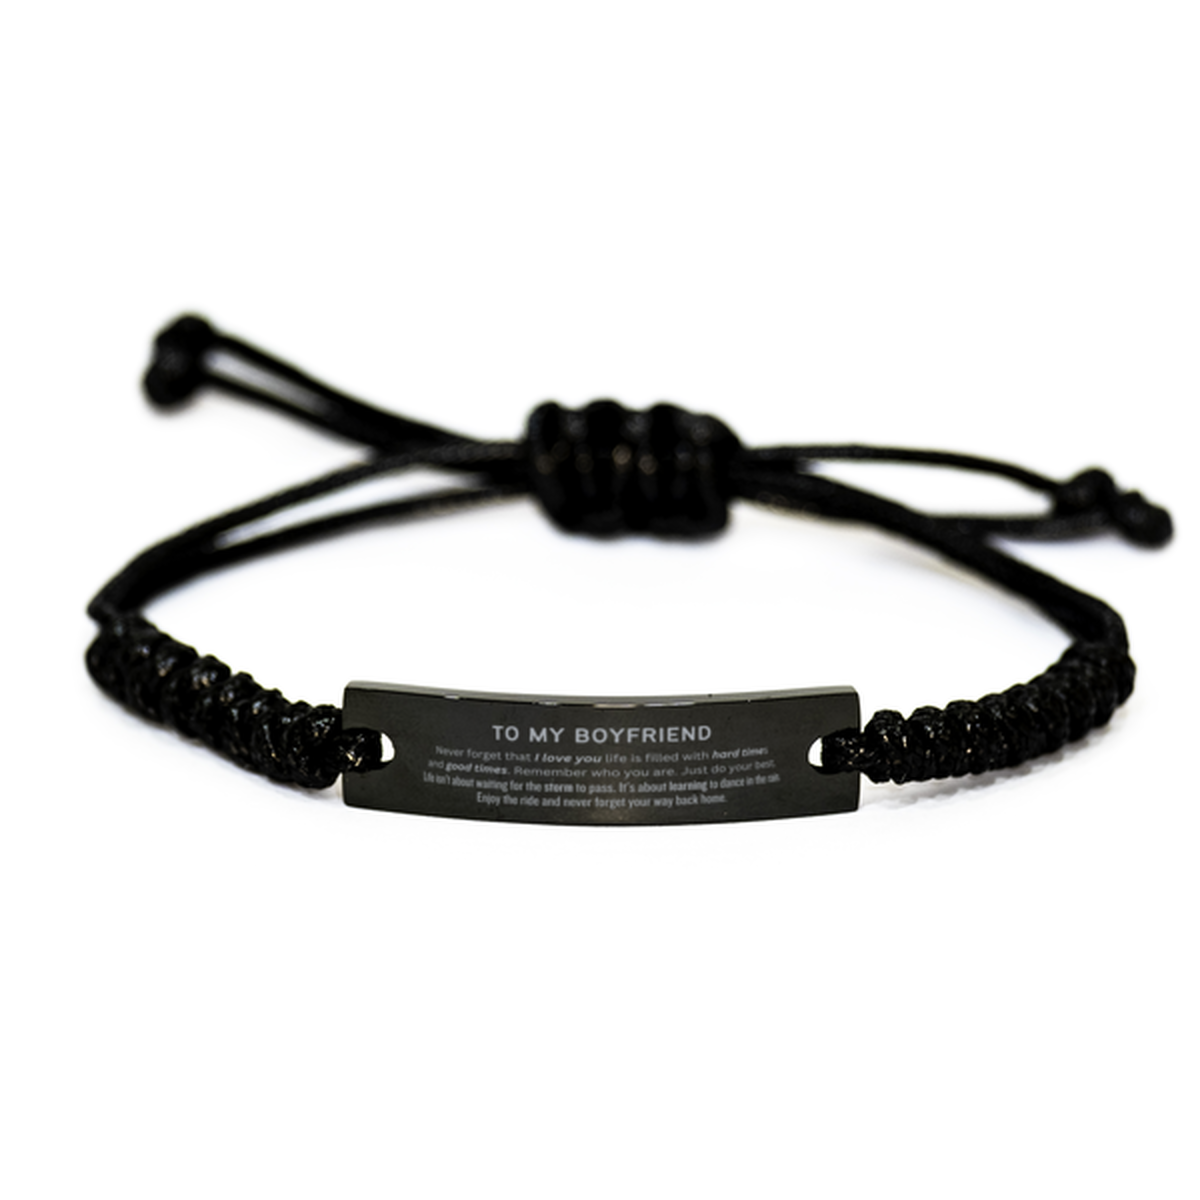 Christmas Boyfriend Black Rope Bracelet Gifts, To My Boyfriend Birthday Thank You Gifts For Boyfriend, Graduation Unique Gifts For Boyfriend To My Boyfriend Never forget that I love you life is filled with hard times and good times. Remember who you are.